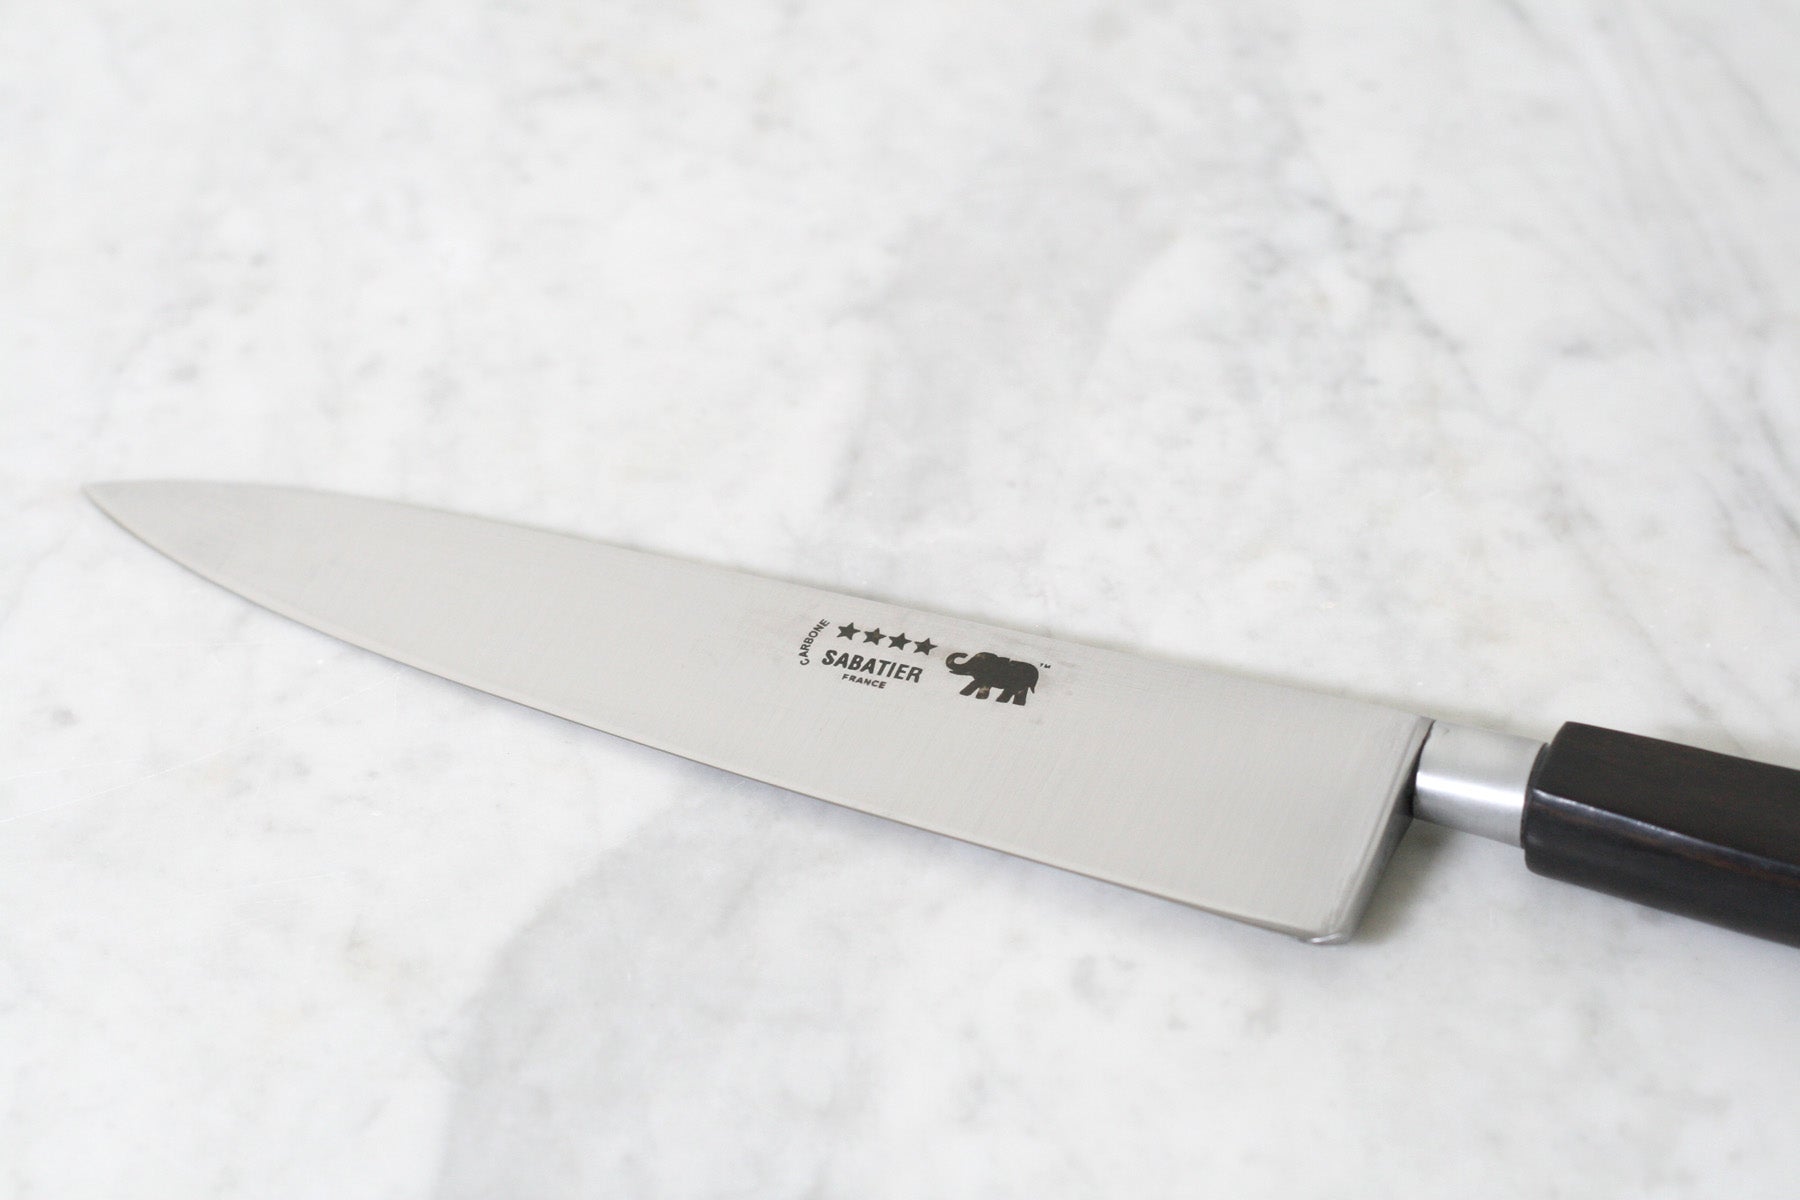 Sabatier Authentic Cutlery forged Knives imported from France